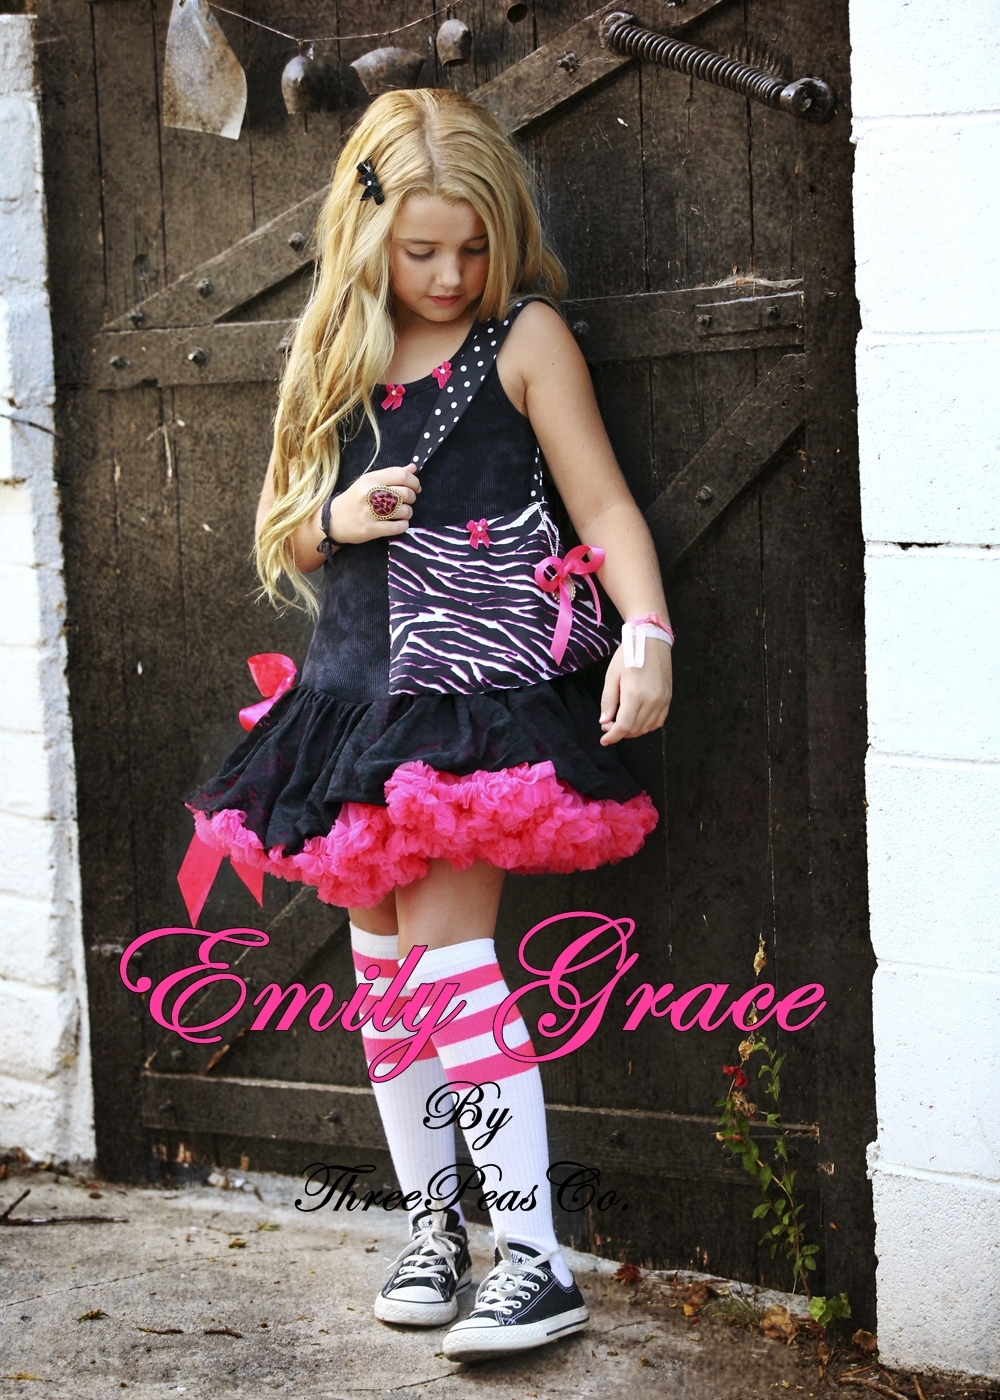 of Emily Grace Reaves. foto of Ems 3pea glamour for peminat-peminat of Emil...